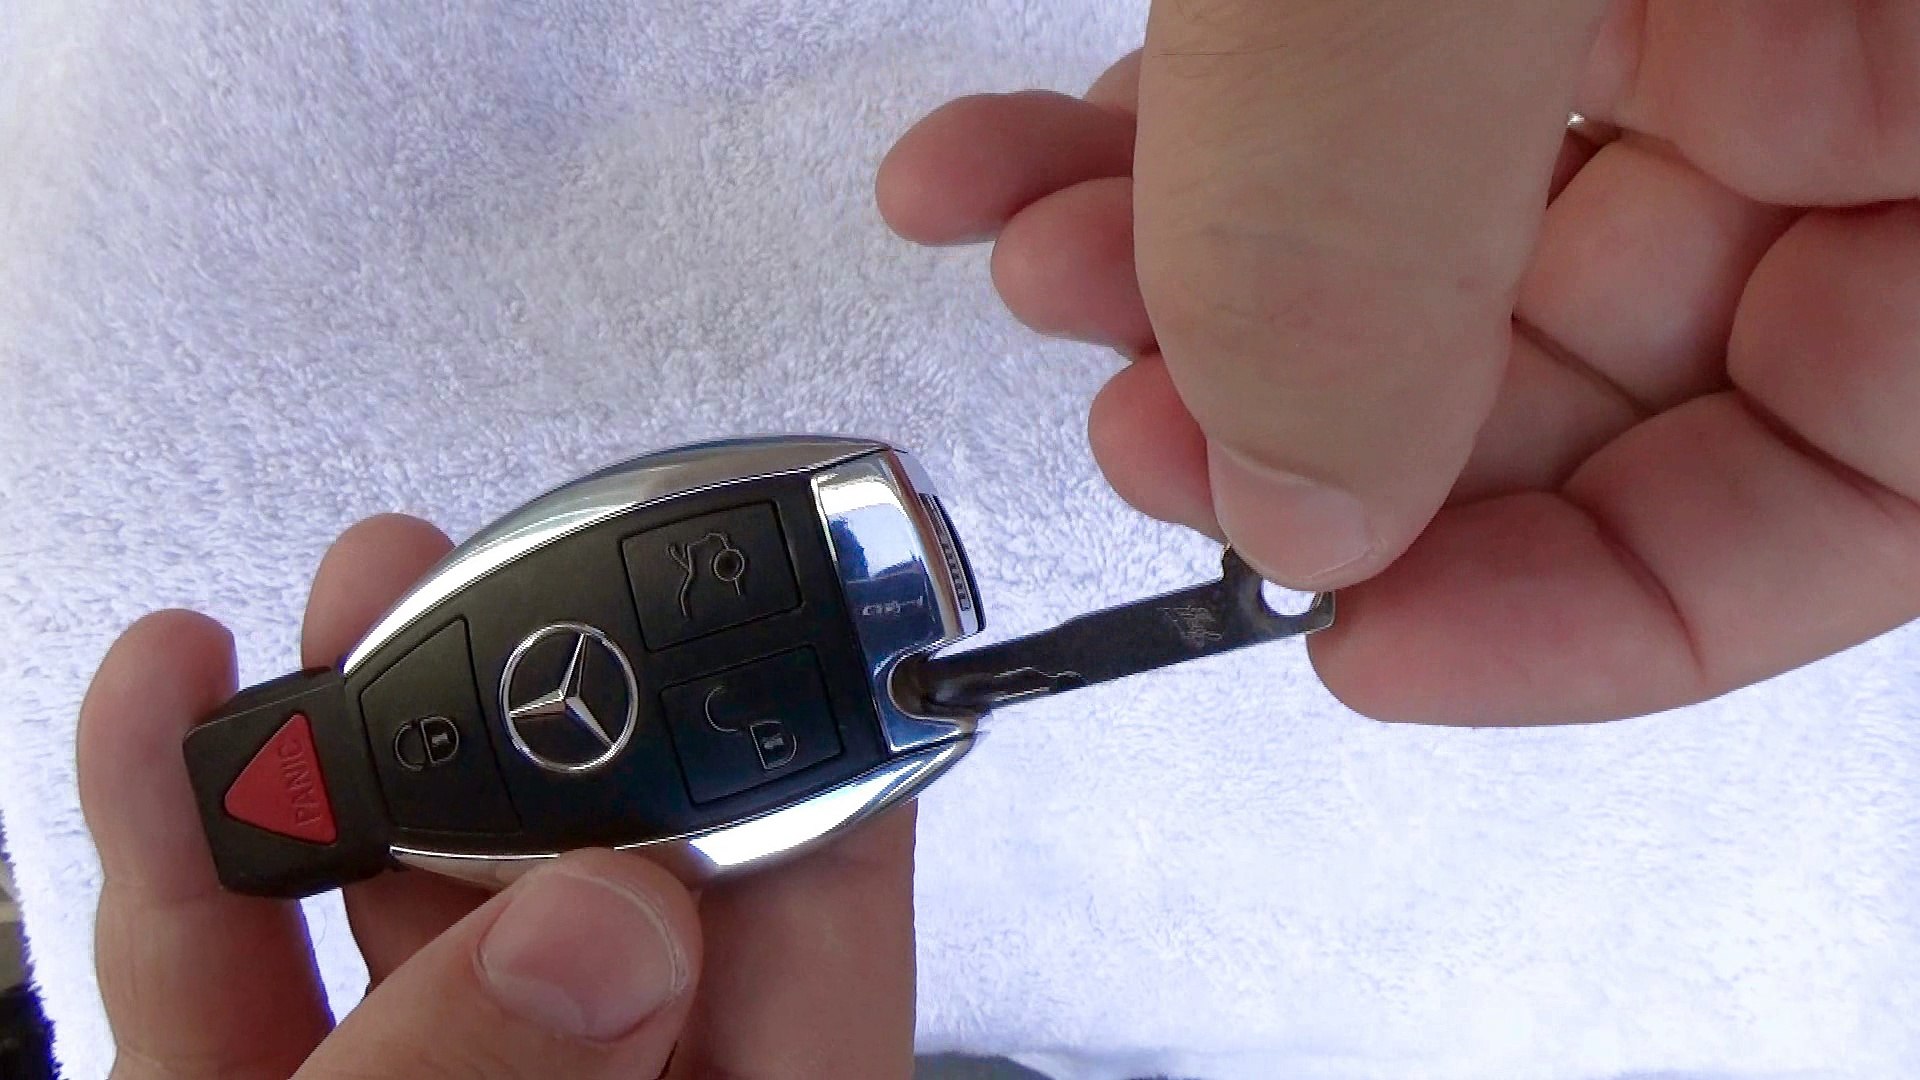 Mercedes Benz Key Fob Battery Replacement / Change - DIY 